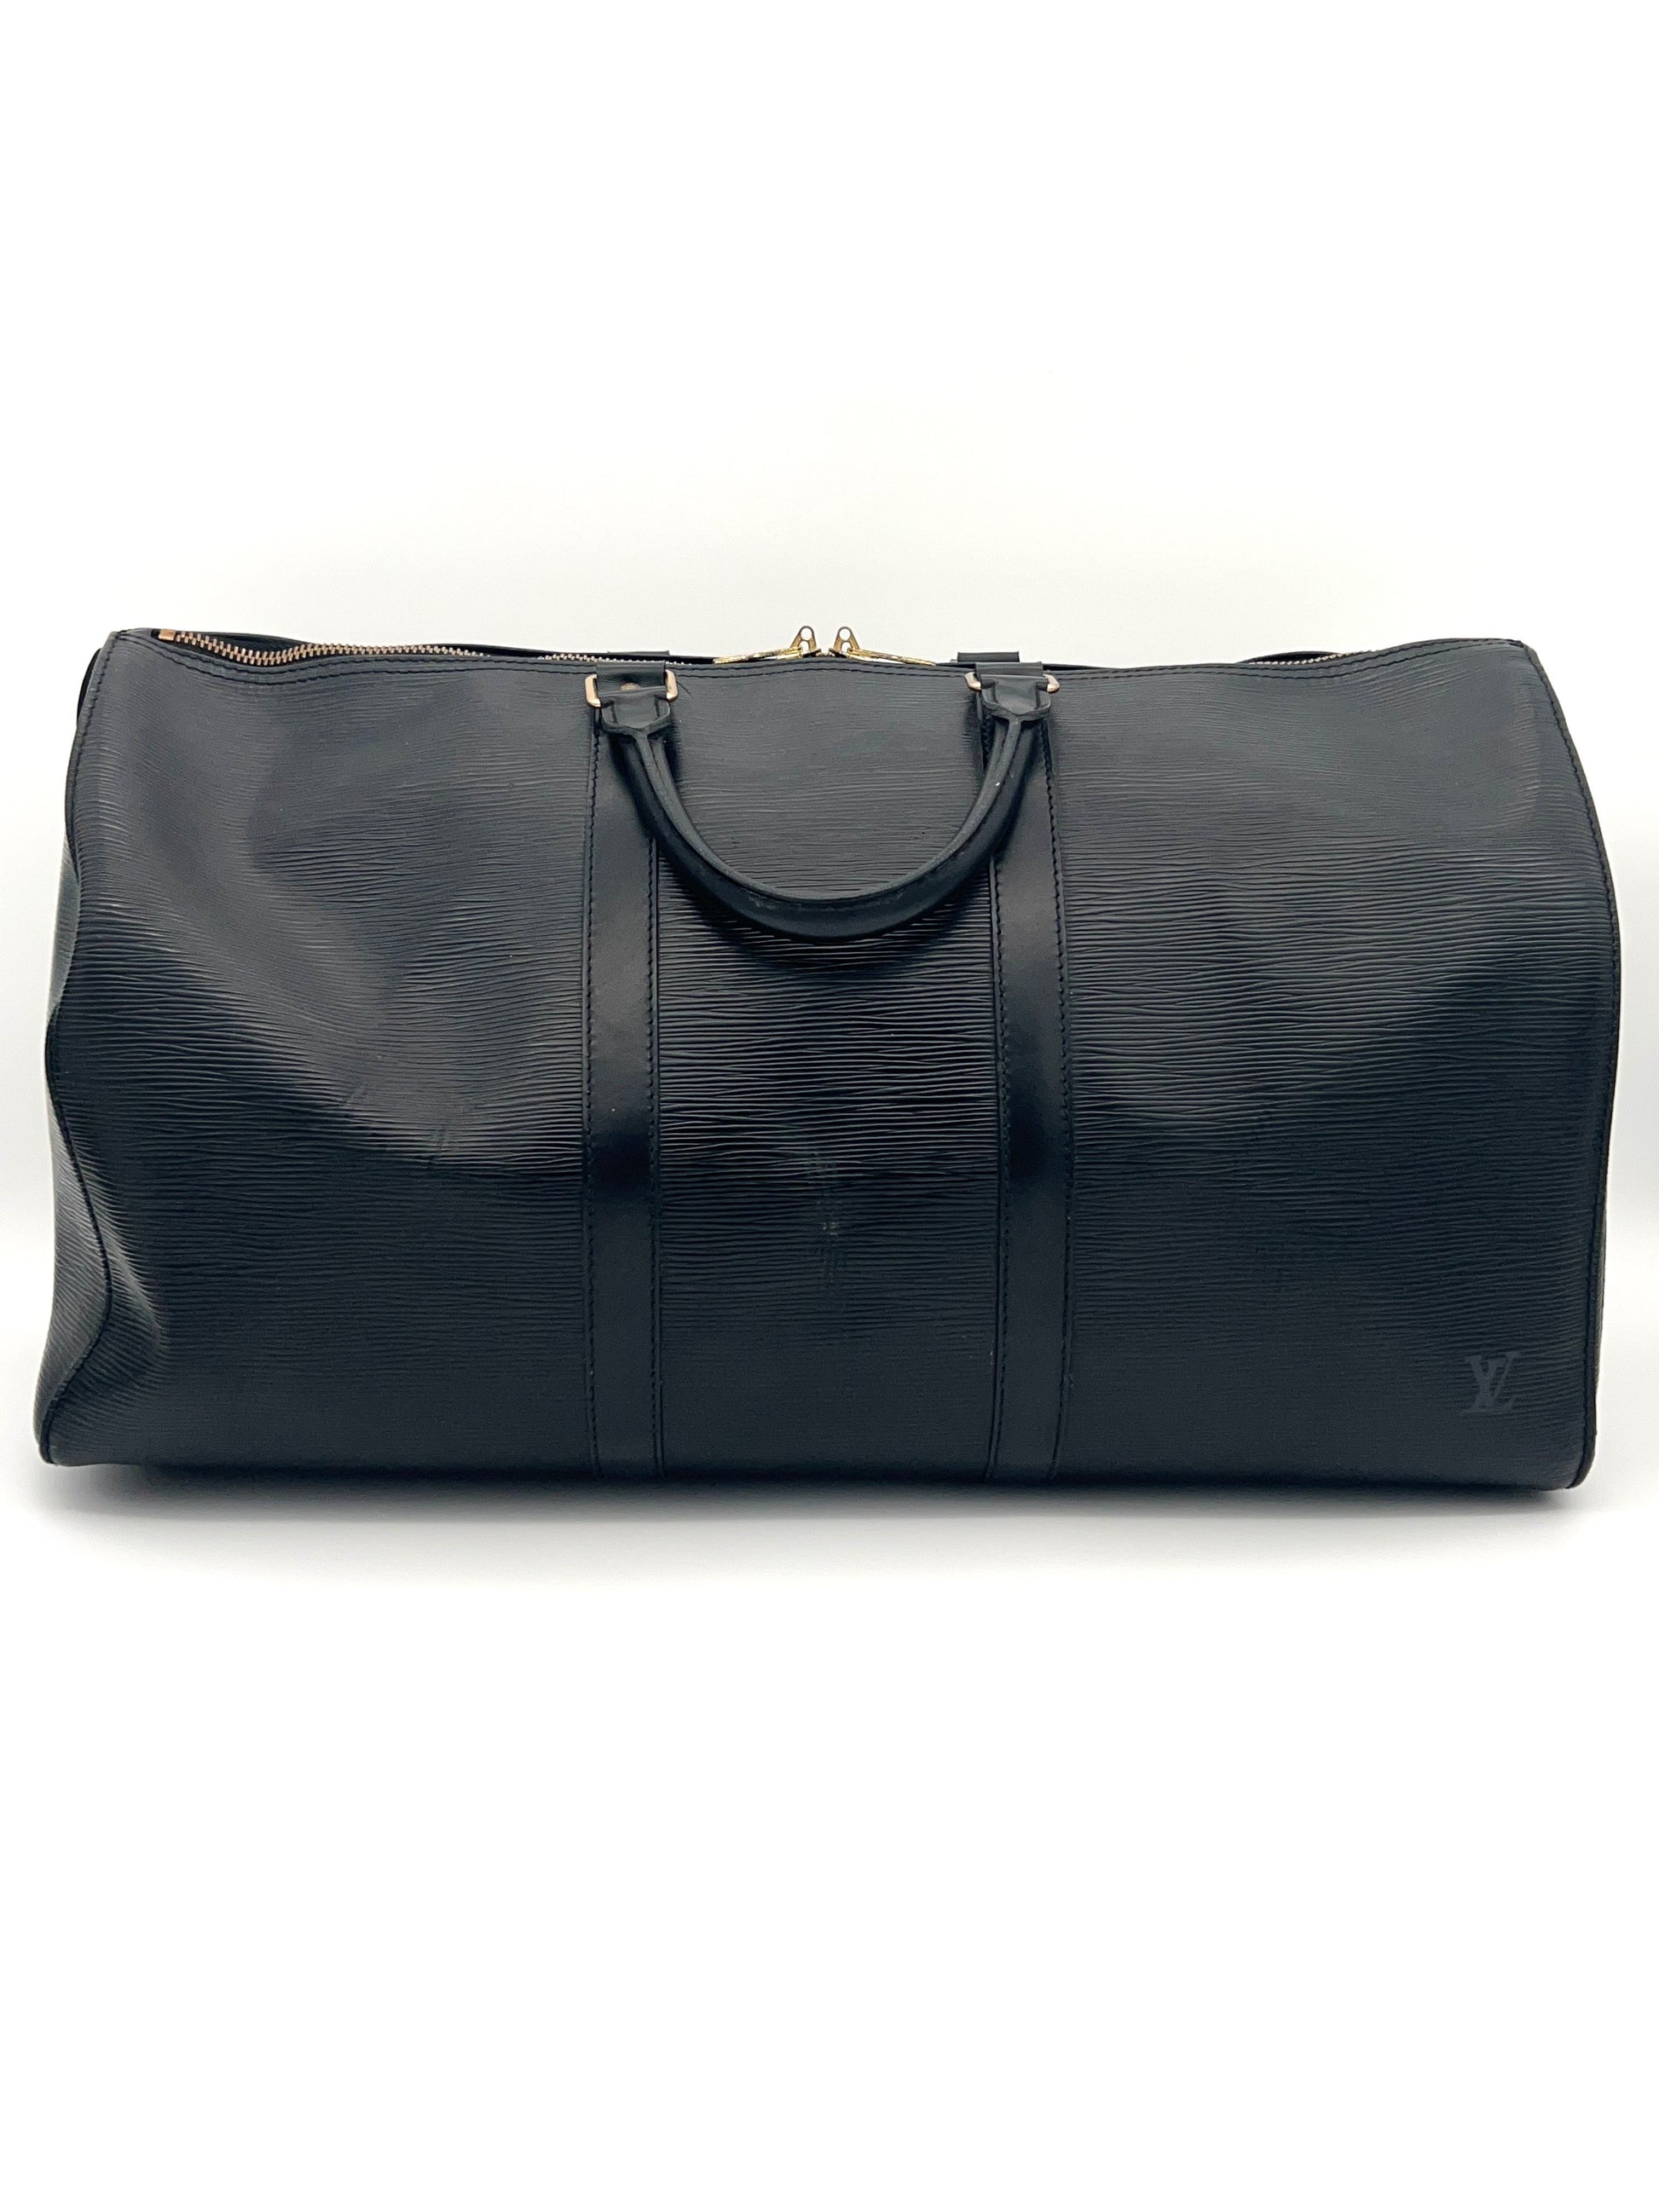 Shop for Louis Vuitton Black Epi Leather Keepall 55 cm Duffle Bag Luggage -  Shipped from USA